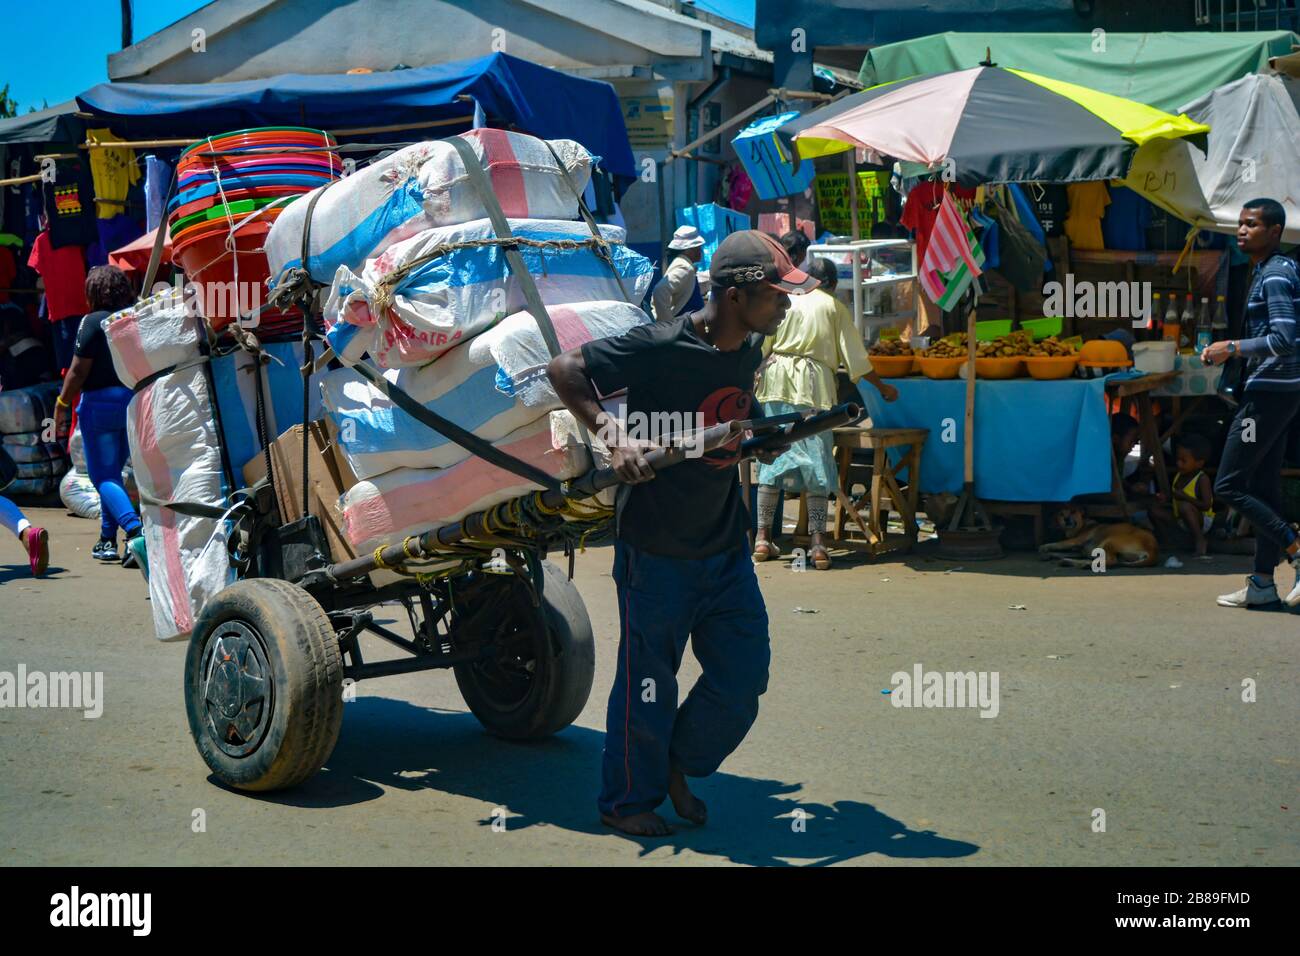 Antananarivo, Madagascar, Africa - 01/12/20: A black man, barefoot, carries a heavy handcart full of bags of flour and buckets. Hard work in a market Stock Photo